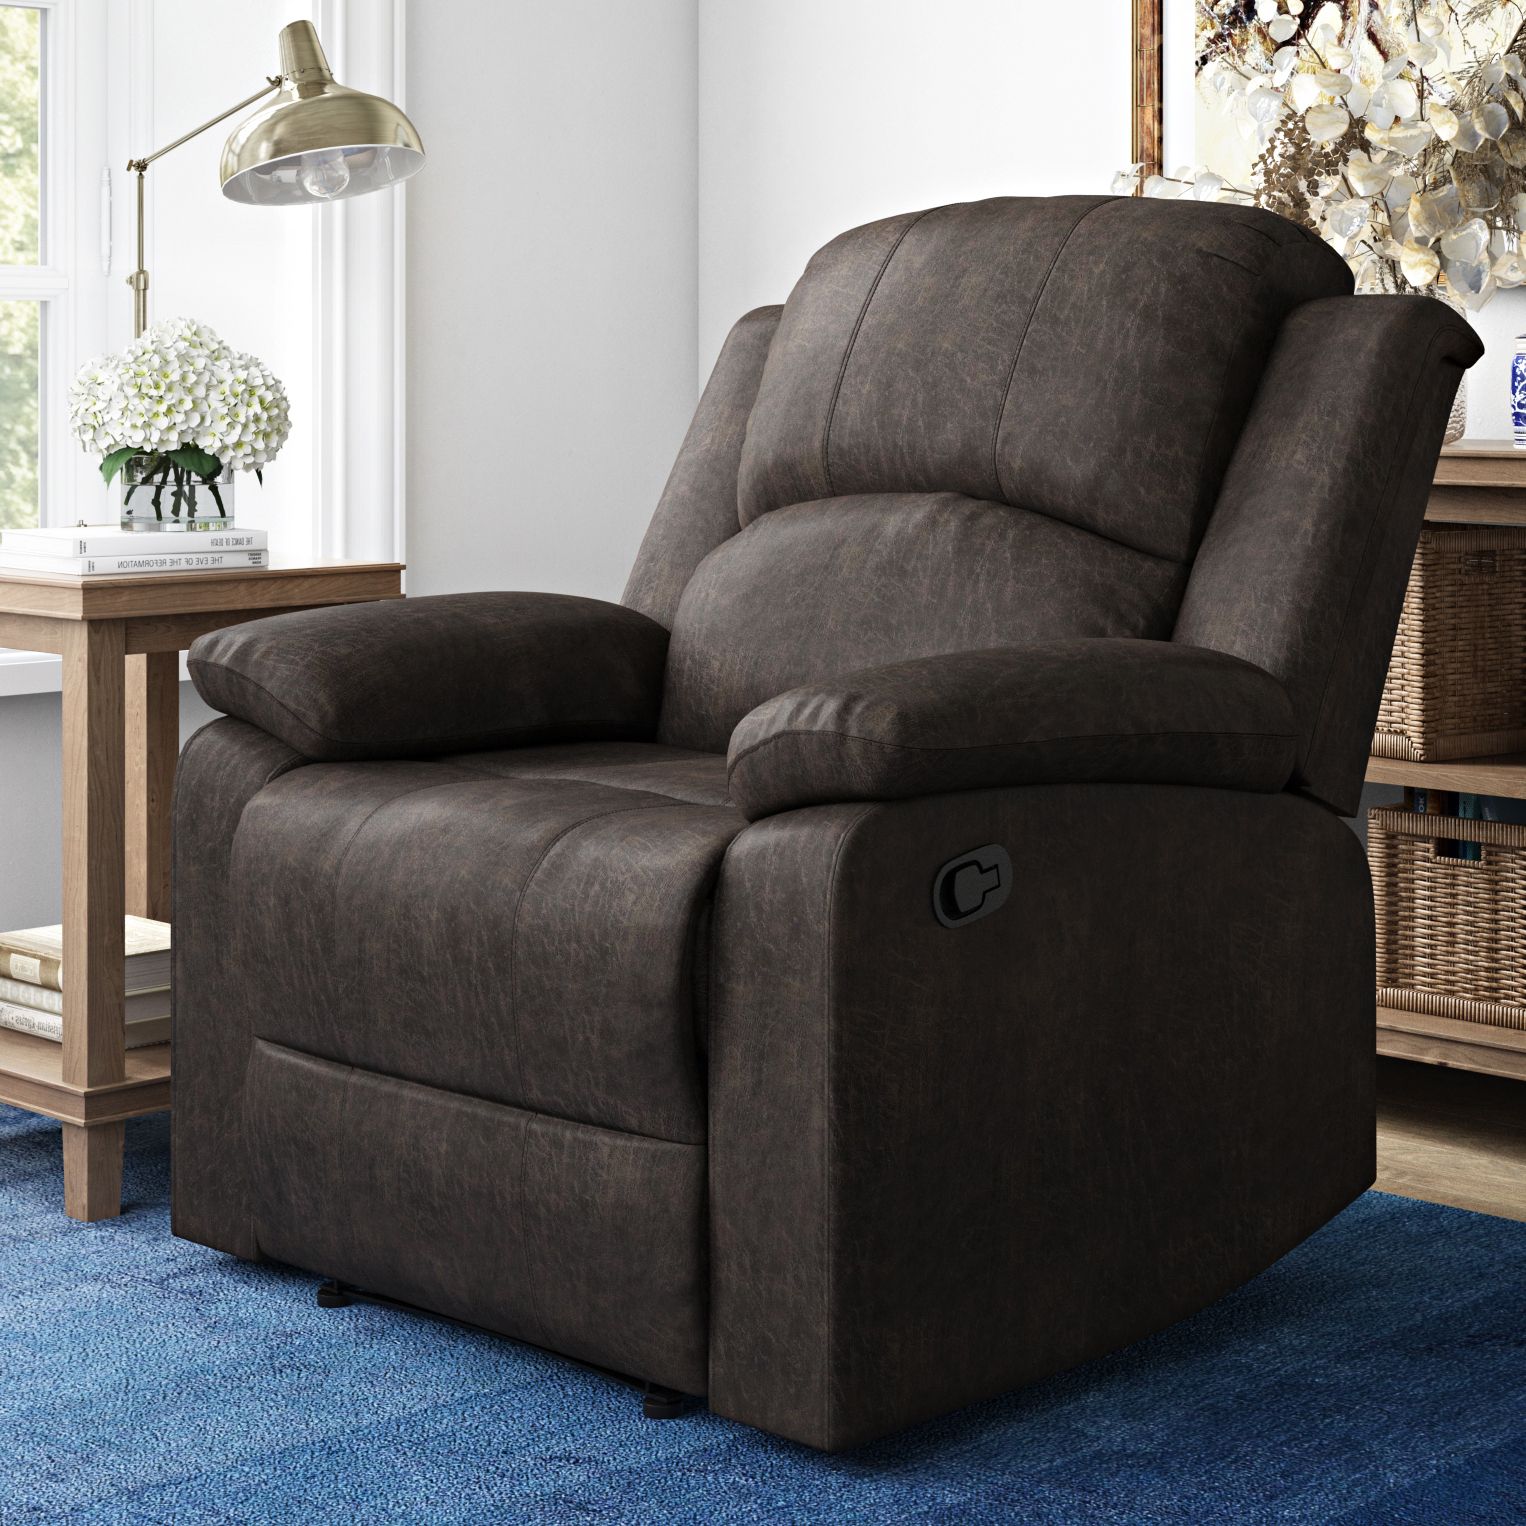 Manual Recliner Large Armchair Faux Suede Lifestyle Regarding Most Recent Reynolds Armchairs (View 1 of 20)